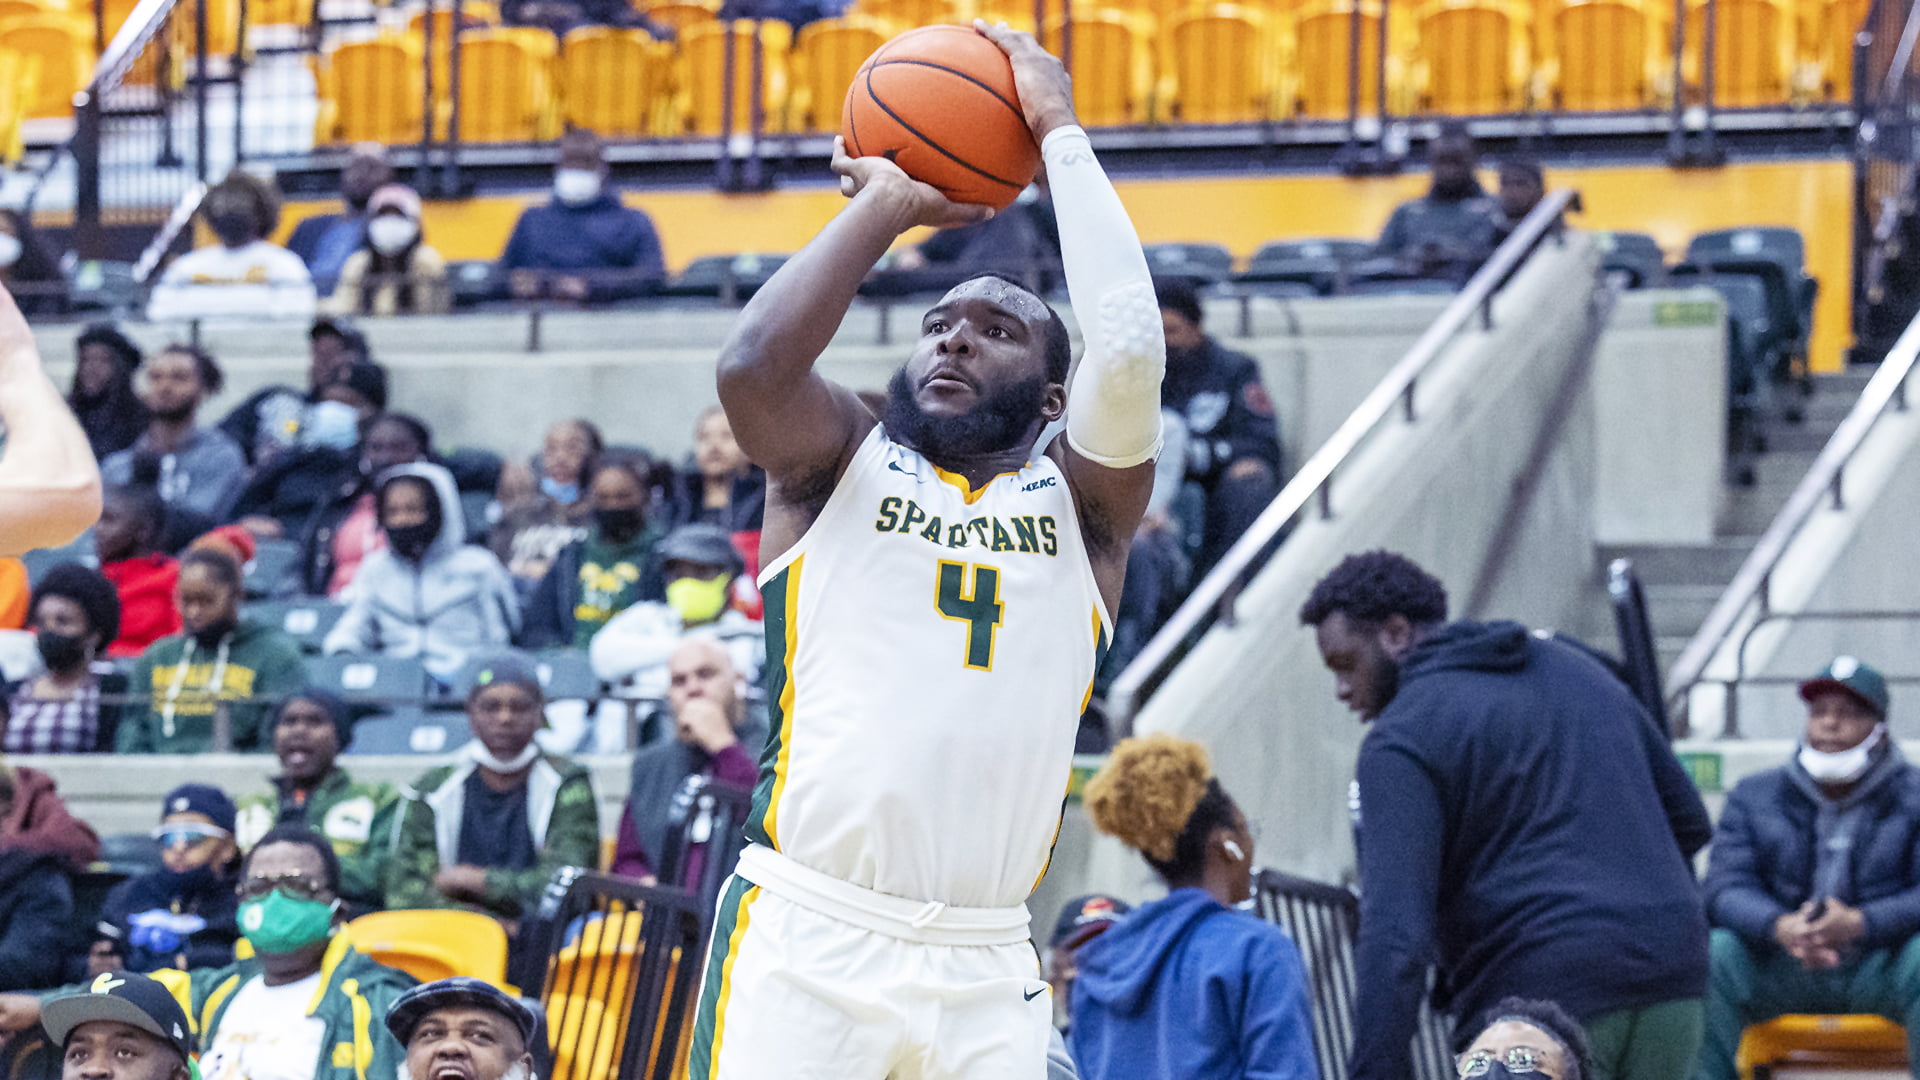 MEAC Basketball Tournament Bracket, Standings, Schedule and Breakdown